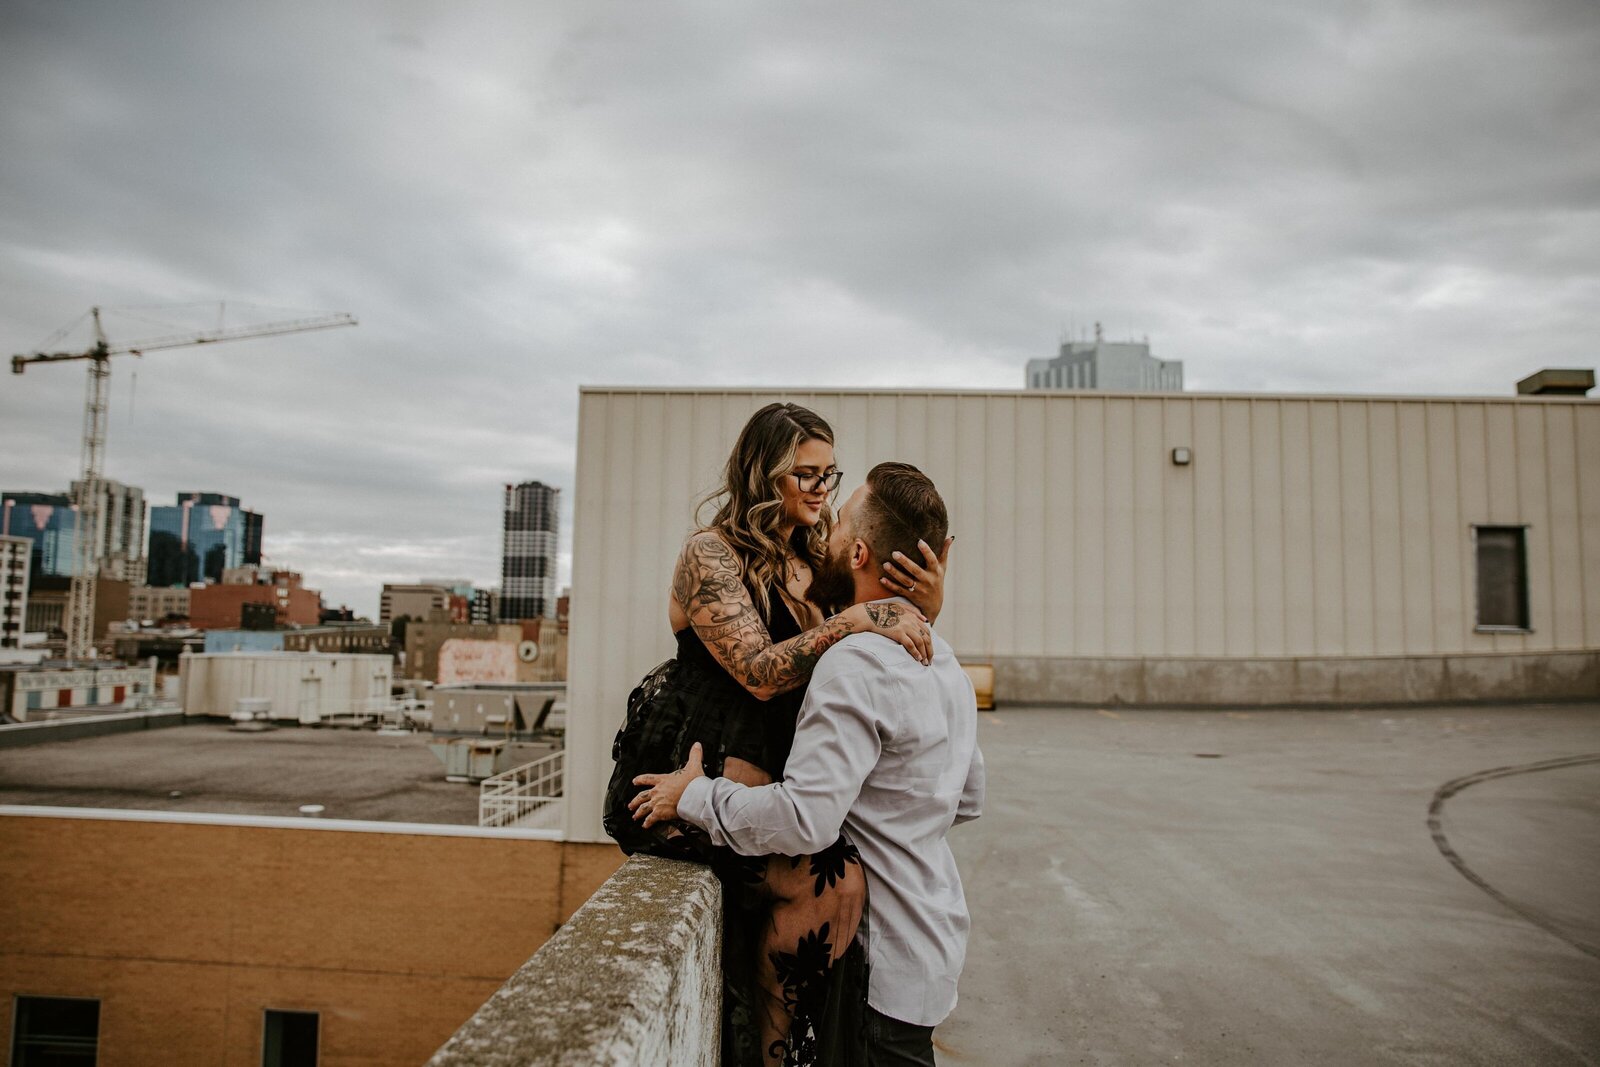 Engaged man and woman on a city rooftop. Woman in black lace gown sitting on the ledge of the parking garage wall; her partner is standing between her legs. They are embracing and looking at each other. City landscape in the background.